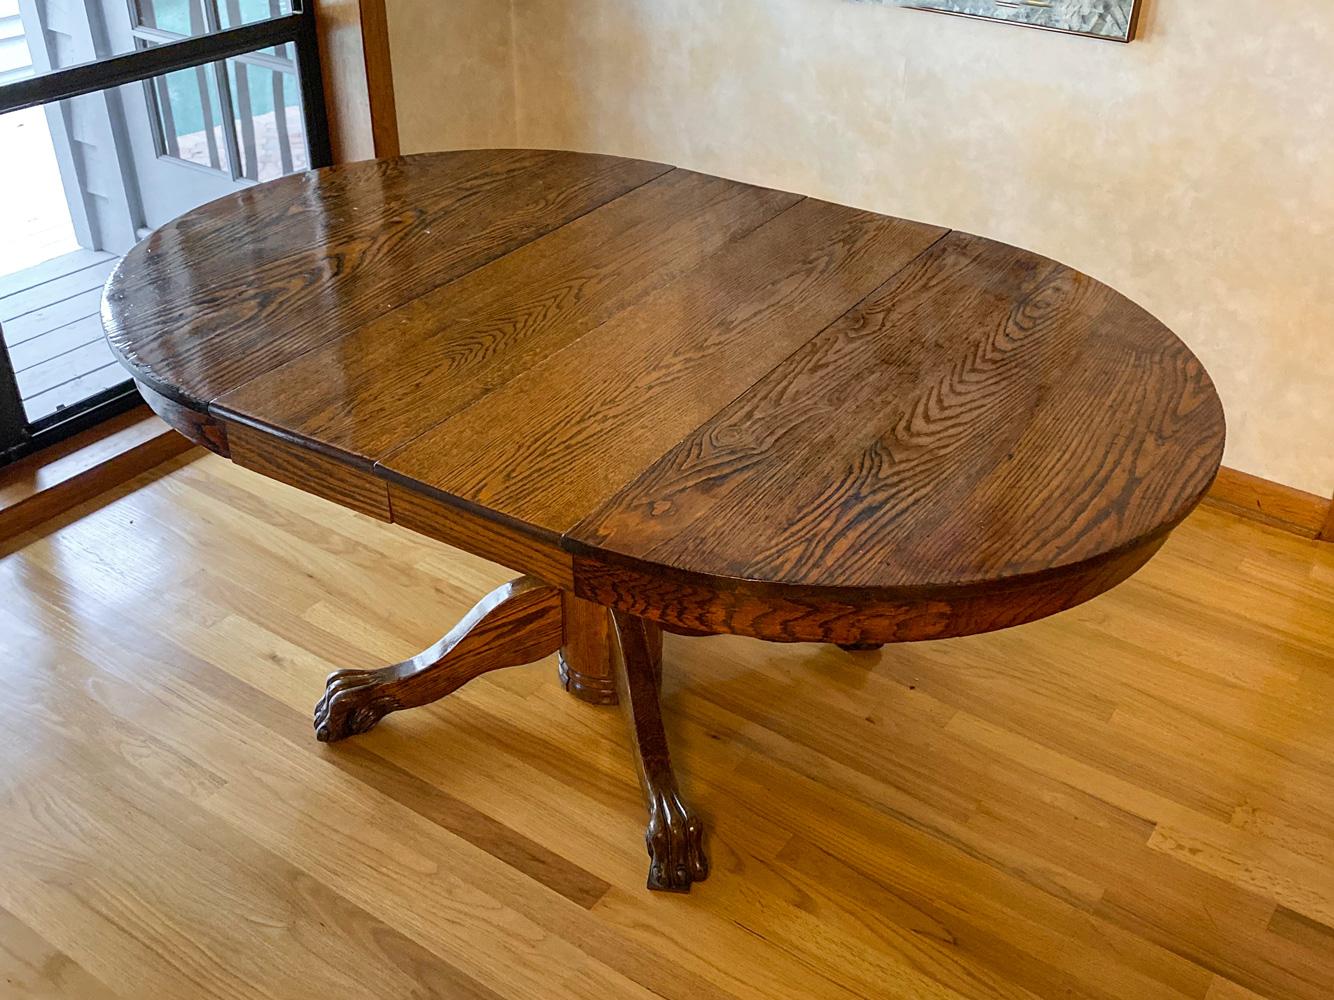 OAK DINING TABLE WITH TWO LEAVES: